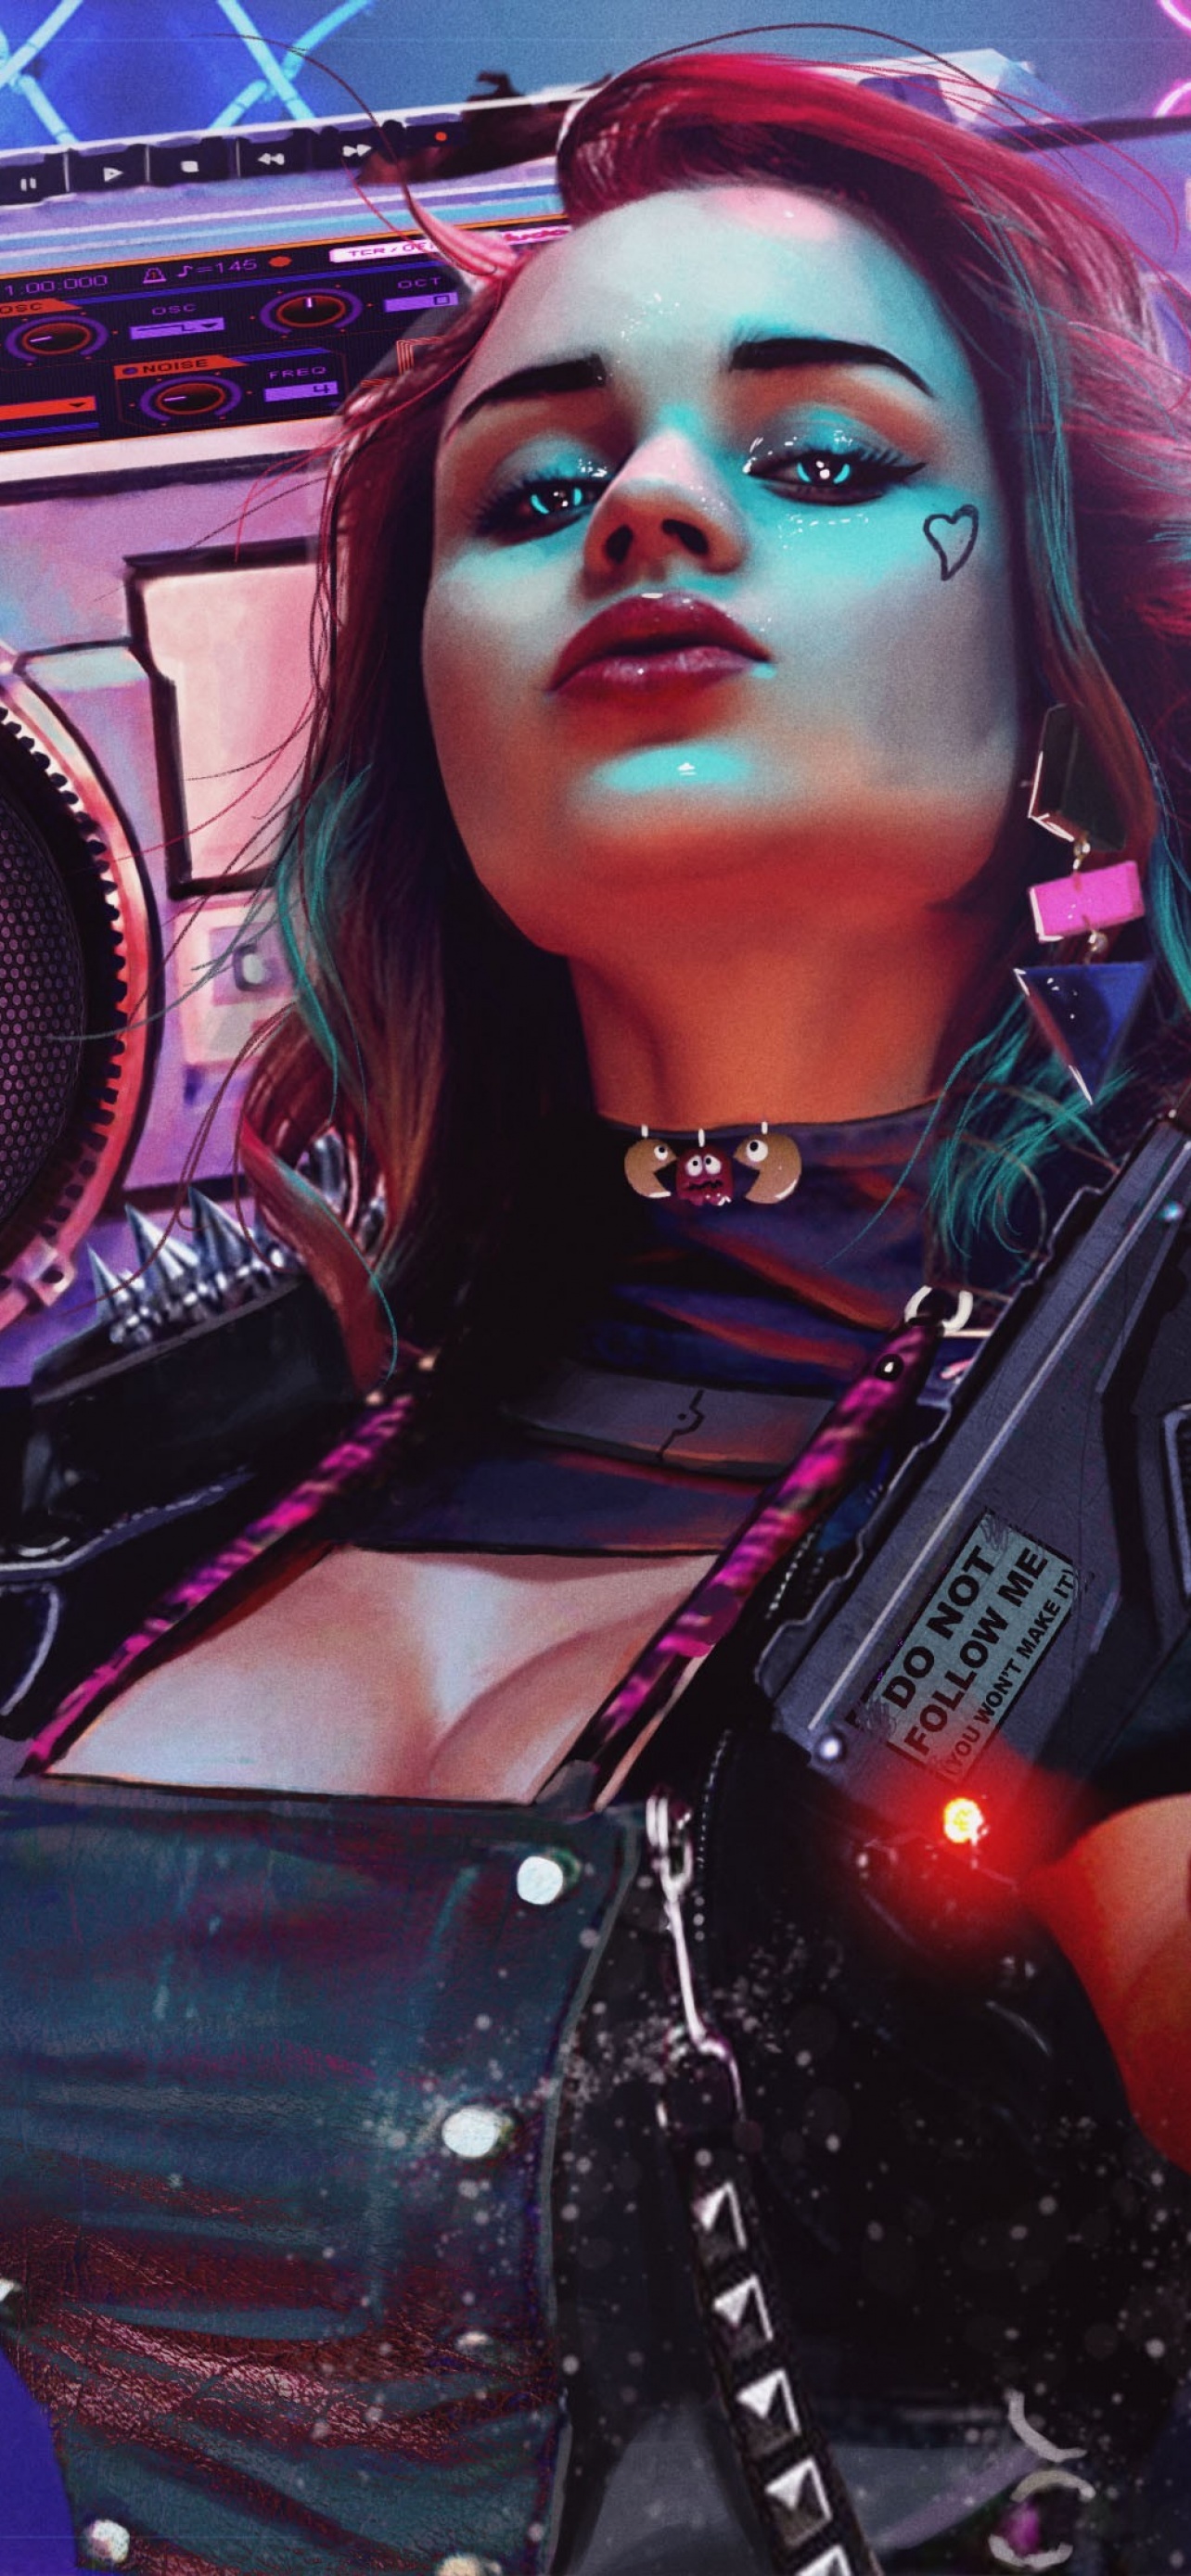 Download V Cyberpunk 2077 wallpapers for mobile phone free V Cyberpunk  2077 HD pictures